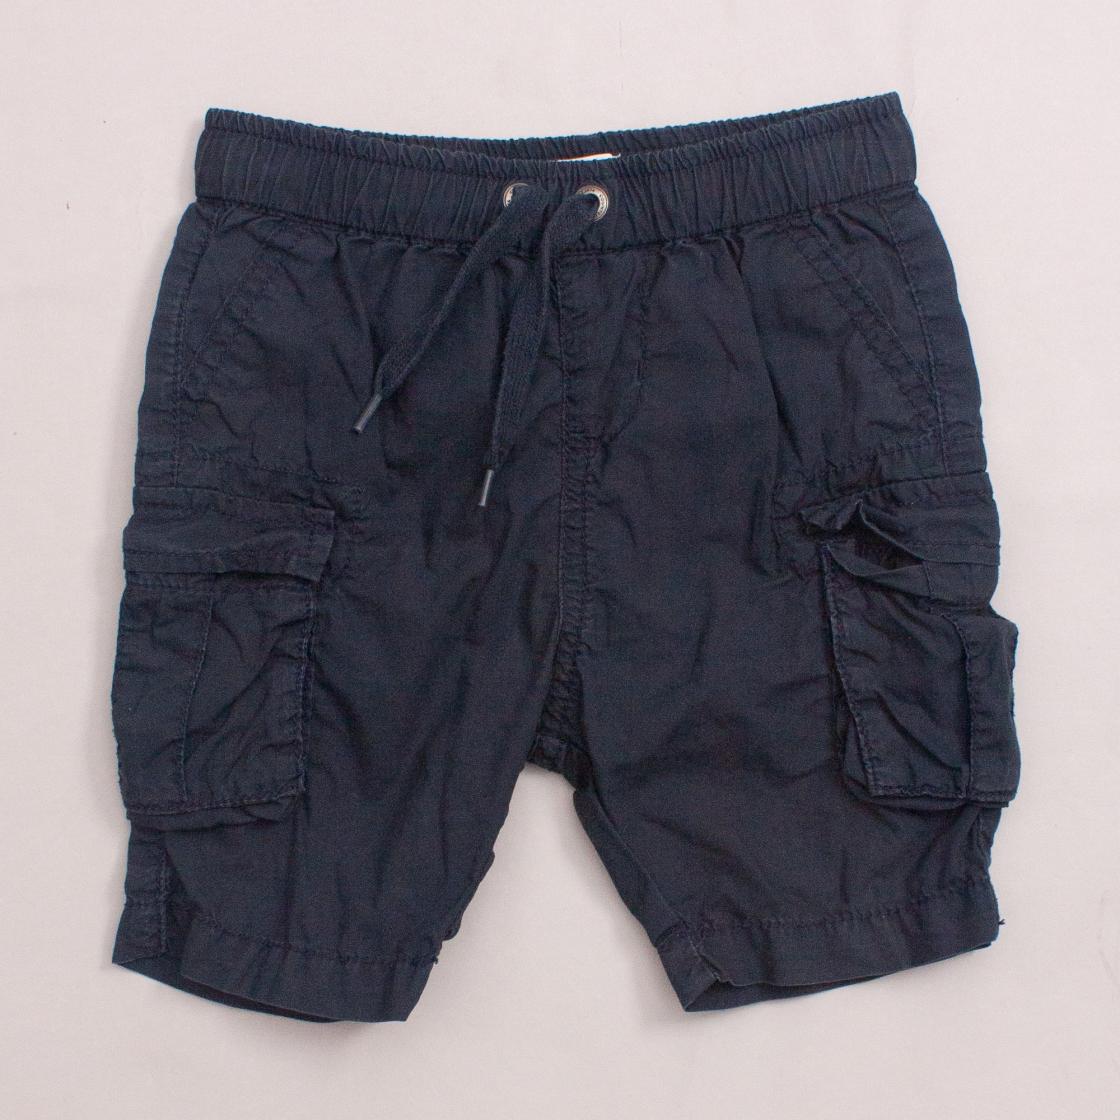 Country Road Cargo Shorts